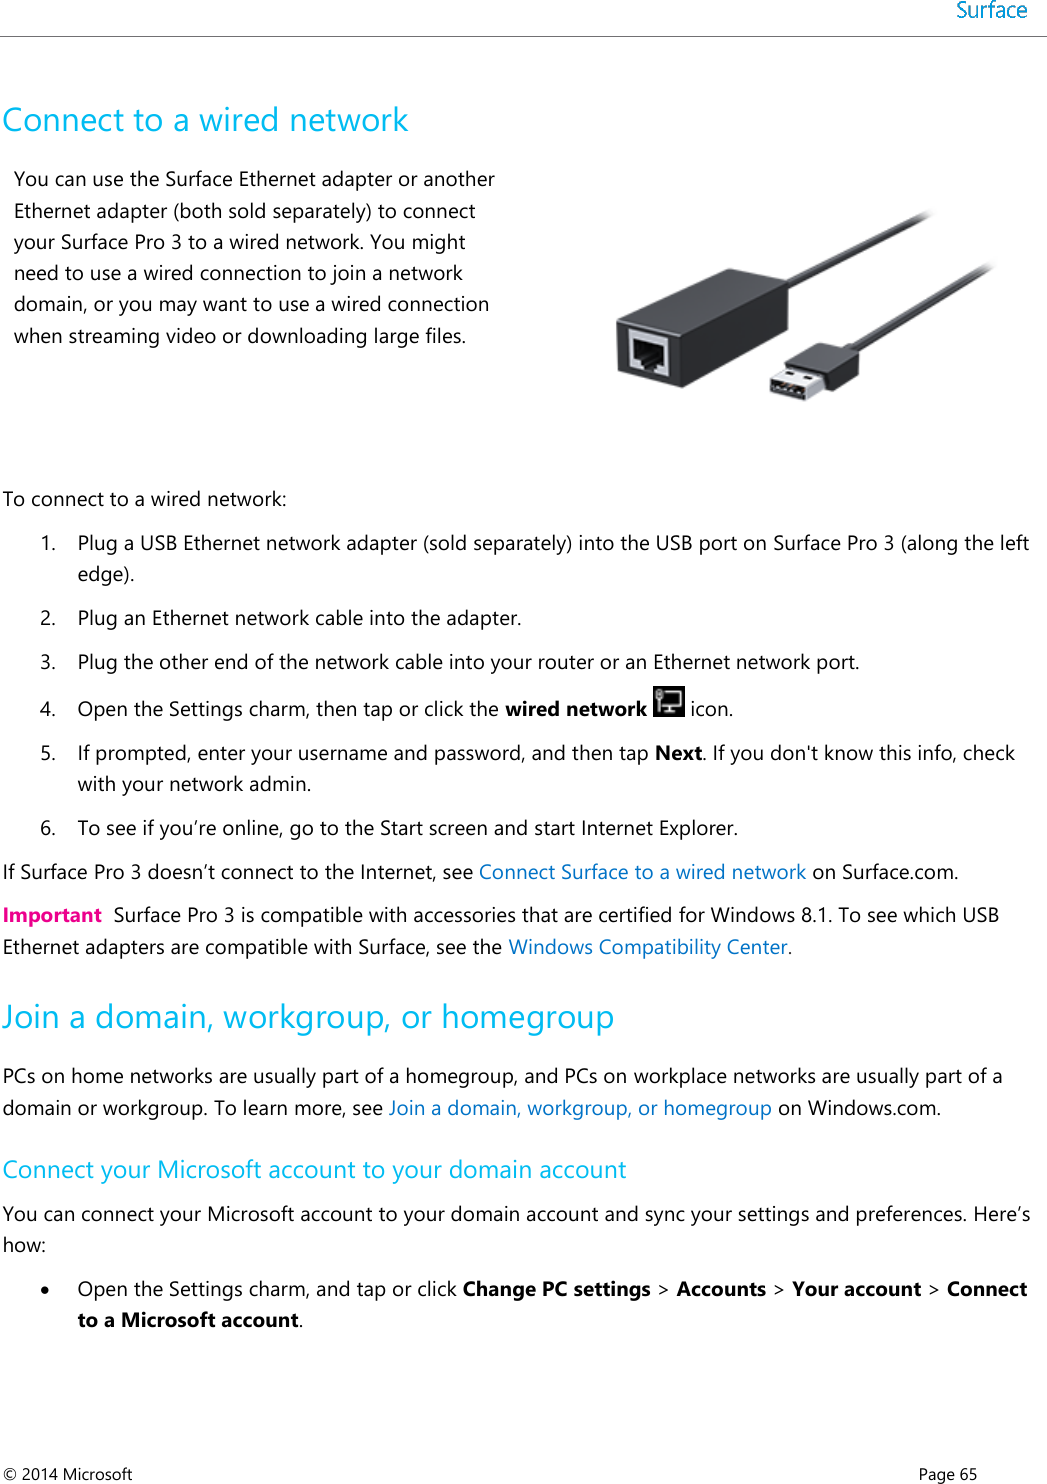  © 2014 Microsoft      Page 65  Connect to a wired network  You can use the Surface Ethernet adapter or another Ethernet adapter (both sold separately) to connect your Surface Pro 3 to a wired network. You might need to use a wired connection to join a network domain, or you may want to use a wired connection when streaming video or downloading large files.   To connect to a wired network: 1. Plug a USB Ethernet network adapter (sold separately) into the USB port on Surface Pro 3 (along the left edge). 2. Plug an Ethernet network cable into the adapter.  3. Plug the other end of the network cable into your router or an Ethernet network port.  4. Open the Settings charm, then tap or click the wired network   icon. 5. If prompted, enter your username and password, and then tap Next. If you don&apos;t know this info, check with your network admin. 6. To see if you’re online, go to the Start screen and start Internet Explorer. If Surface Pro 3 doesn’t connect to the Internet, see Connect Surface to a wired network on Surface.com.  Important  Surface Pro 3 is compatible with accessories that are certified for Windows 8.1. To see which USB Ethernet adapters are compatible with Surface, see the Windows Compatibility Center.  Join a domain, workgroup, or homegroup PCs on home networks are usually part of a homegroup, and PCs on workplace networks are usually part of a domain or workgroup. To learn more, see Join a domain, workgroup, or homegroup on Windows.com.  Connect your Microsoft account to your domain account You can connect your Microsoft account to your domain account and sync your settings and preferences. Here’s how:  Open the Settings charm, and tap or click Change PC settings &gt; Accounts &gt; Your account &gt; Connect to a Microsoft account.  